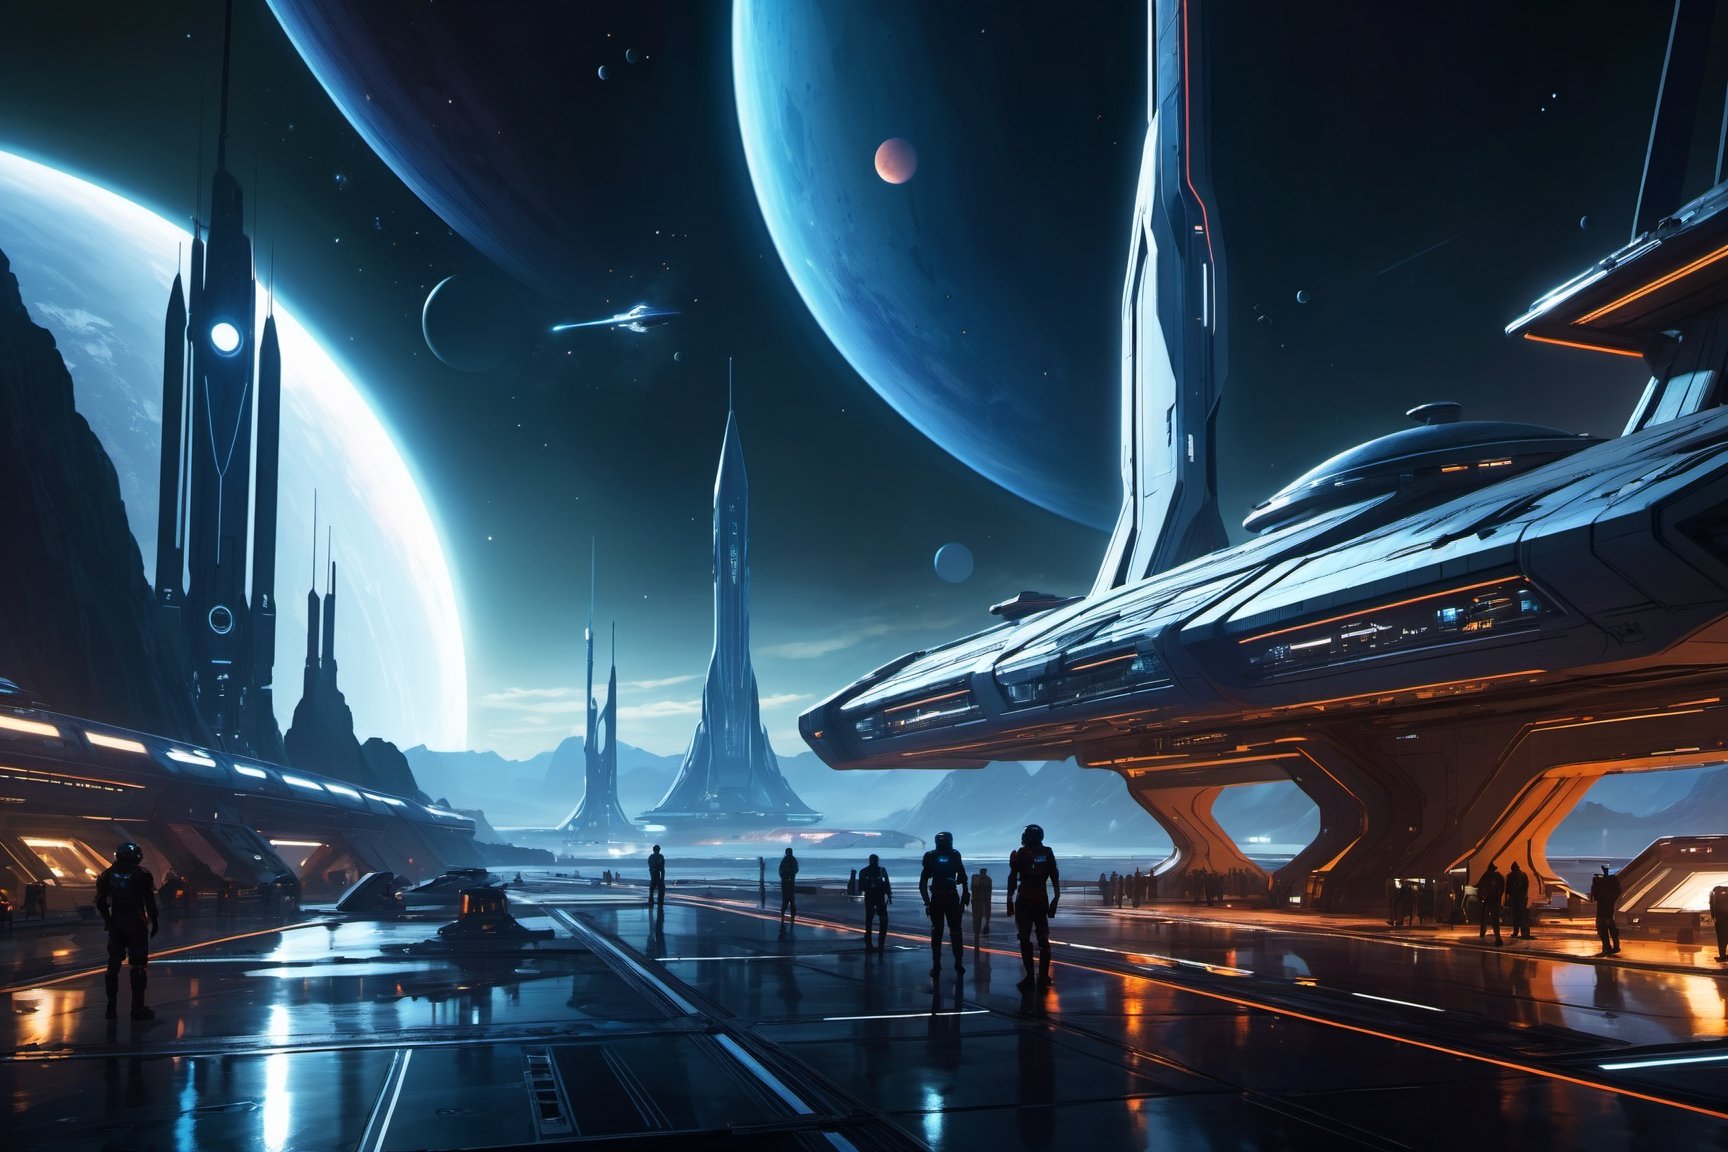 (8k HDR), (masterpiece, best quality), 

Futuristic Spaceport at Dawn:

"A bustling futuristic spaceport at dawn, with starships of various designs docking and departing. Travelers from different galaxies mingle, their diverse appearances a testament to the vastness of the universe. Ground crews prepare ships for launch against a backdrop of a rising alien sun, casting a hopeful light on the day’s journeys."

dark and vibrant, science fiction, night, (James Cameron cinematic shots), depth of field, 2D